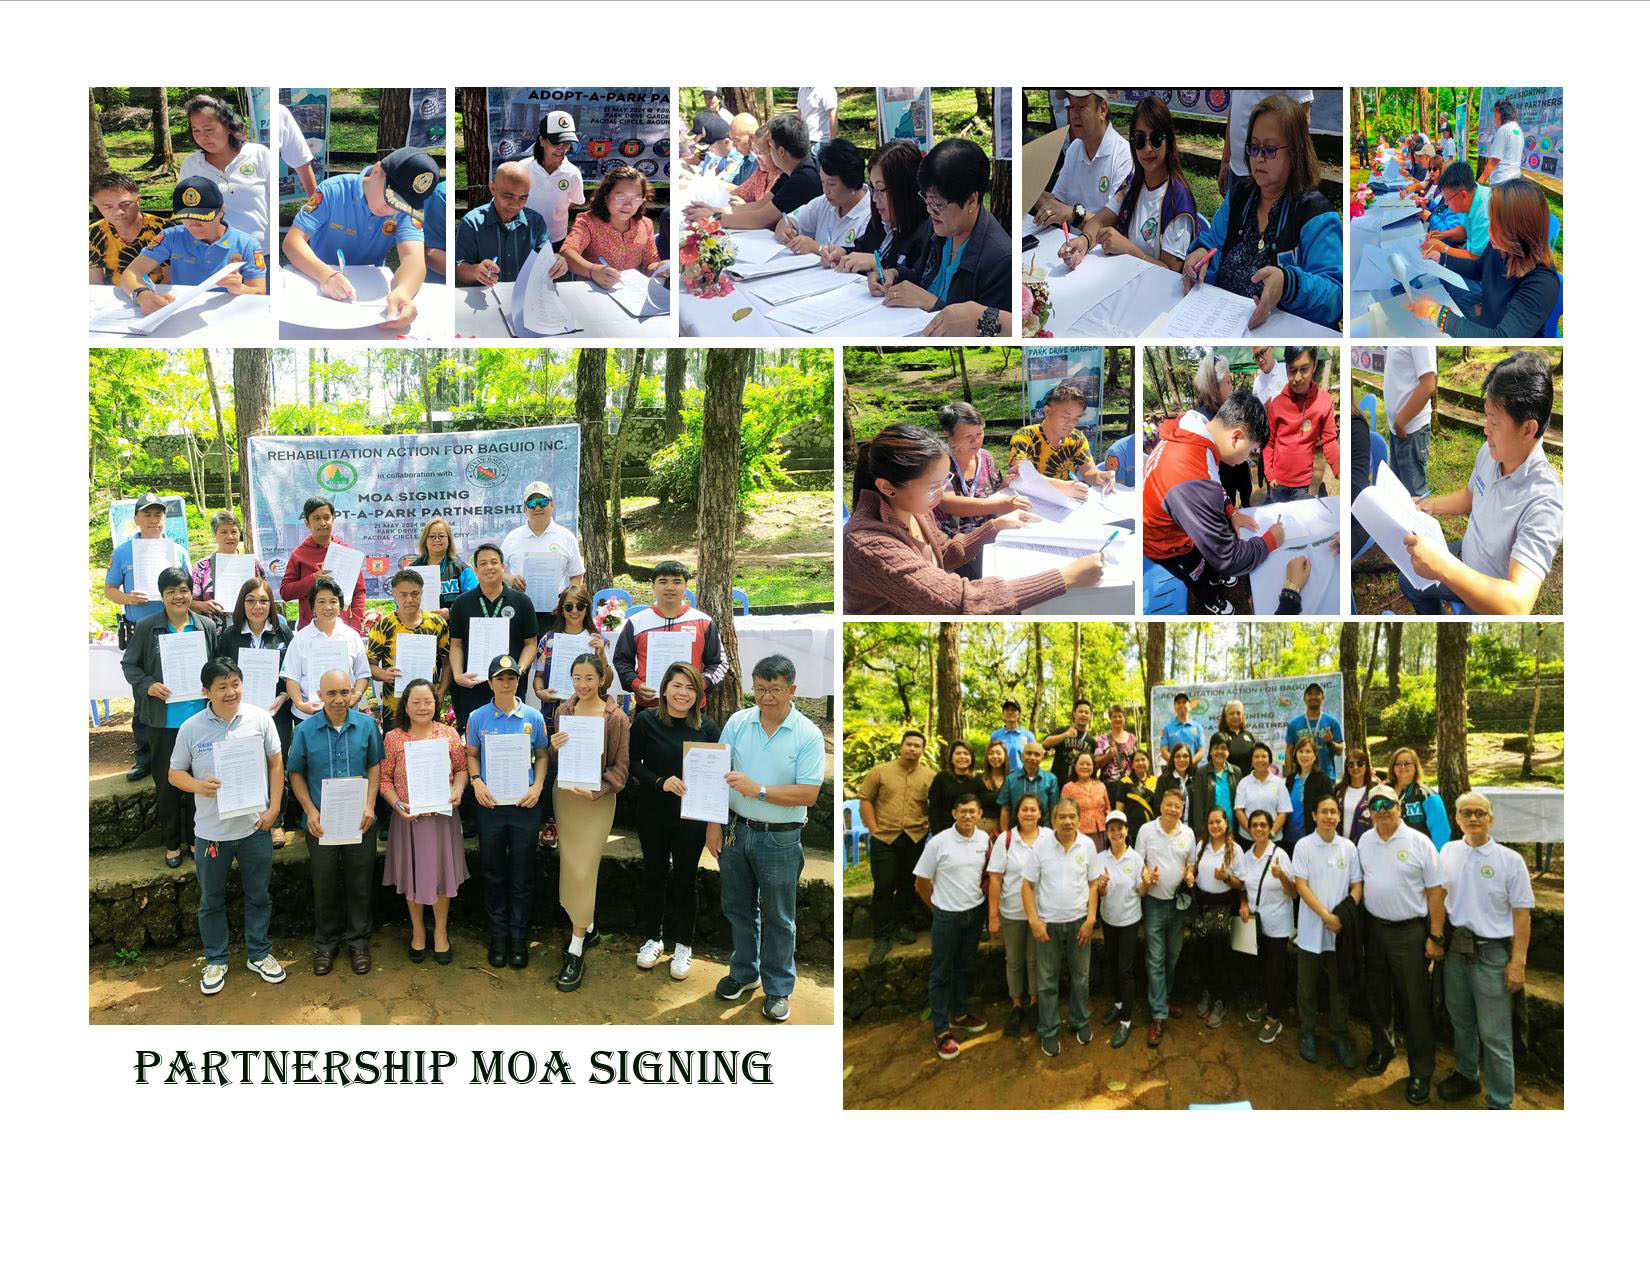 Partners and RAB signed the MOA for the Adopt A Park program